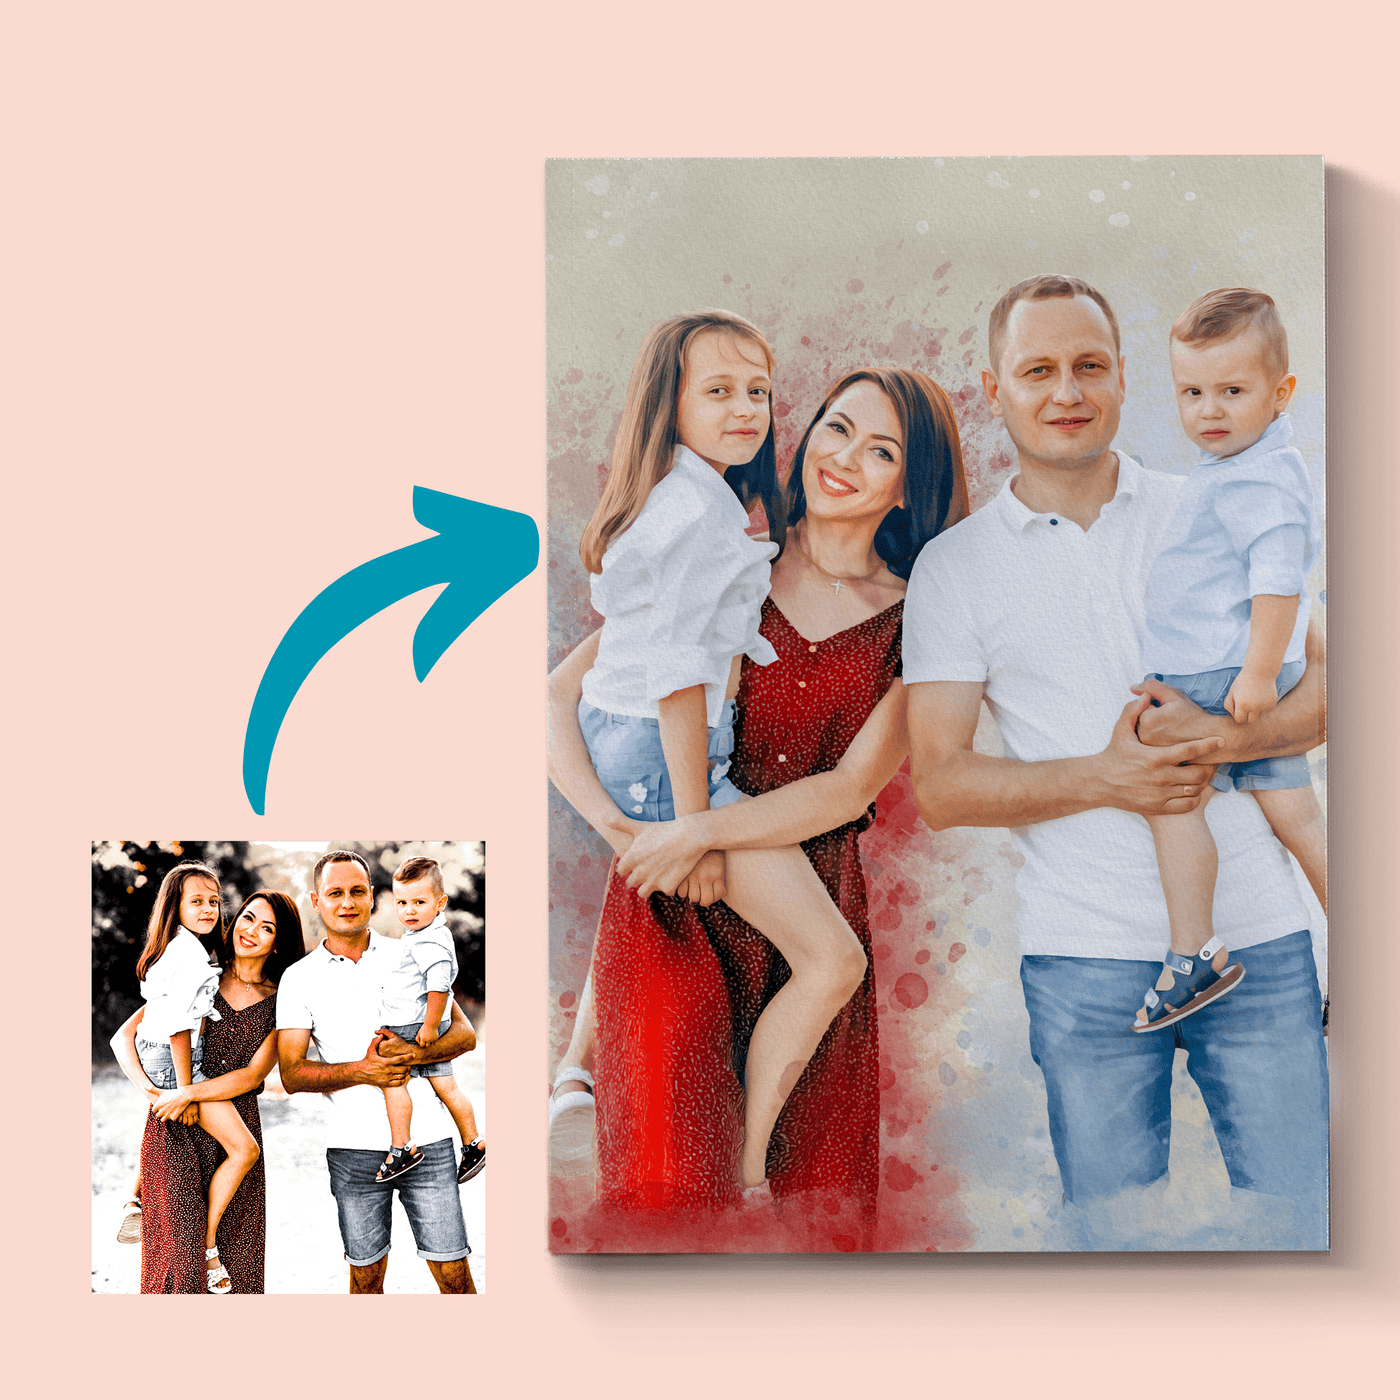 photo recreation of a family photo transforming from an old photo into a new and improved version.